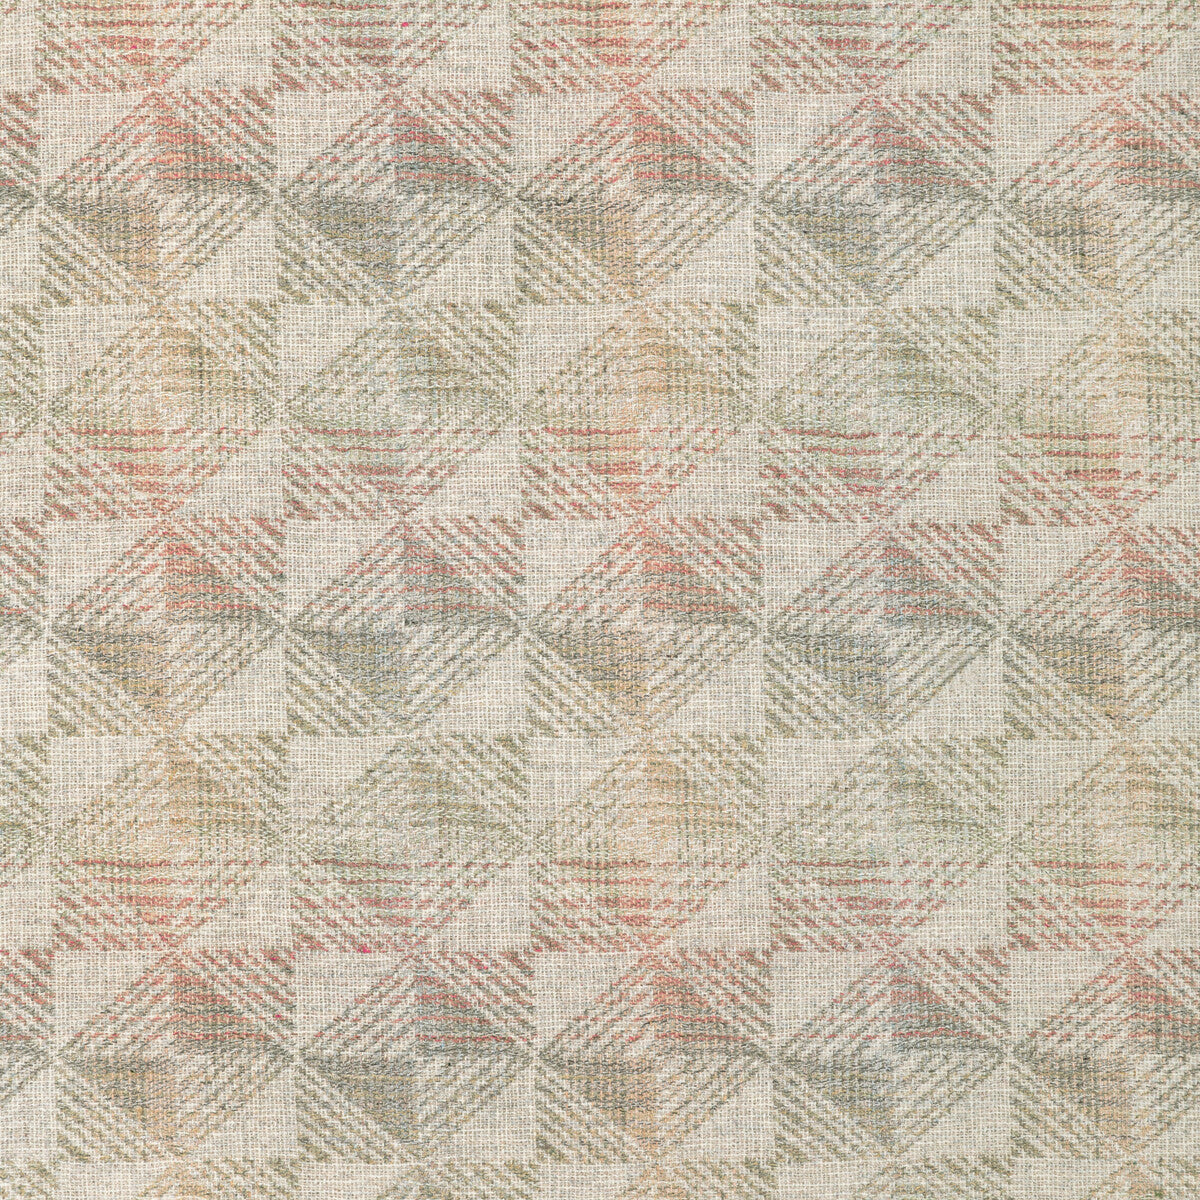 Quito fabric in succulent color - pattern 36397.324.0 - by Kravet Couture in the Barbara Barry Ojai collection